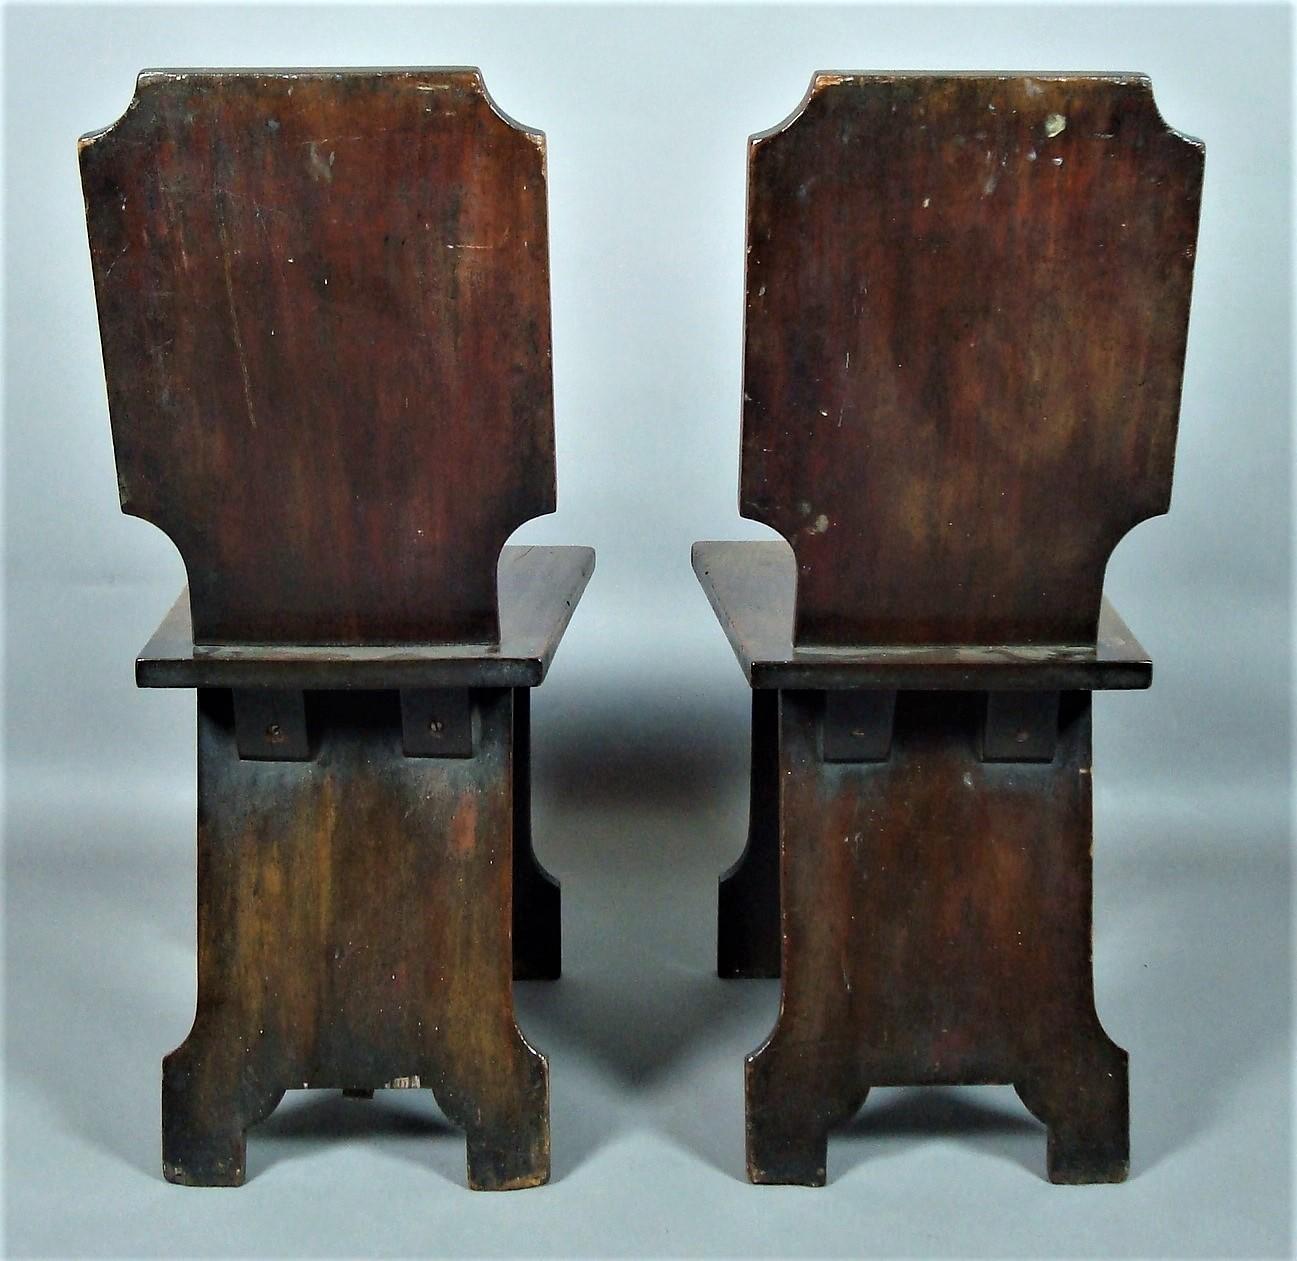 English Regency Pair of Mahogany Hall Chairs Very Unusual Restrained Design For Sale